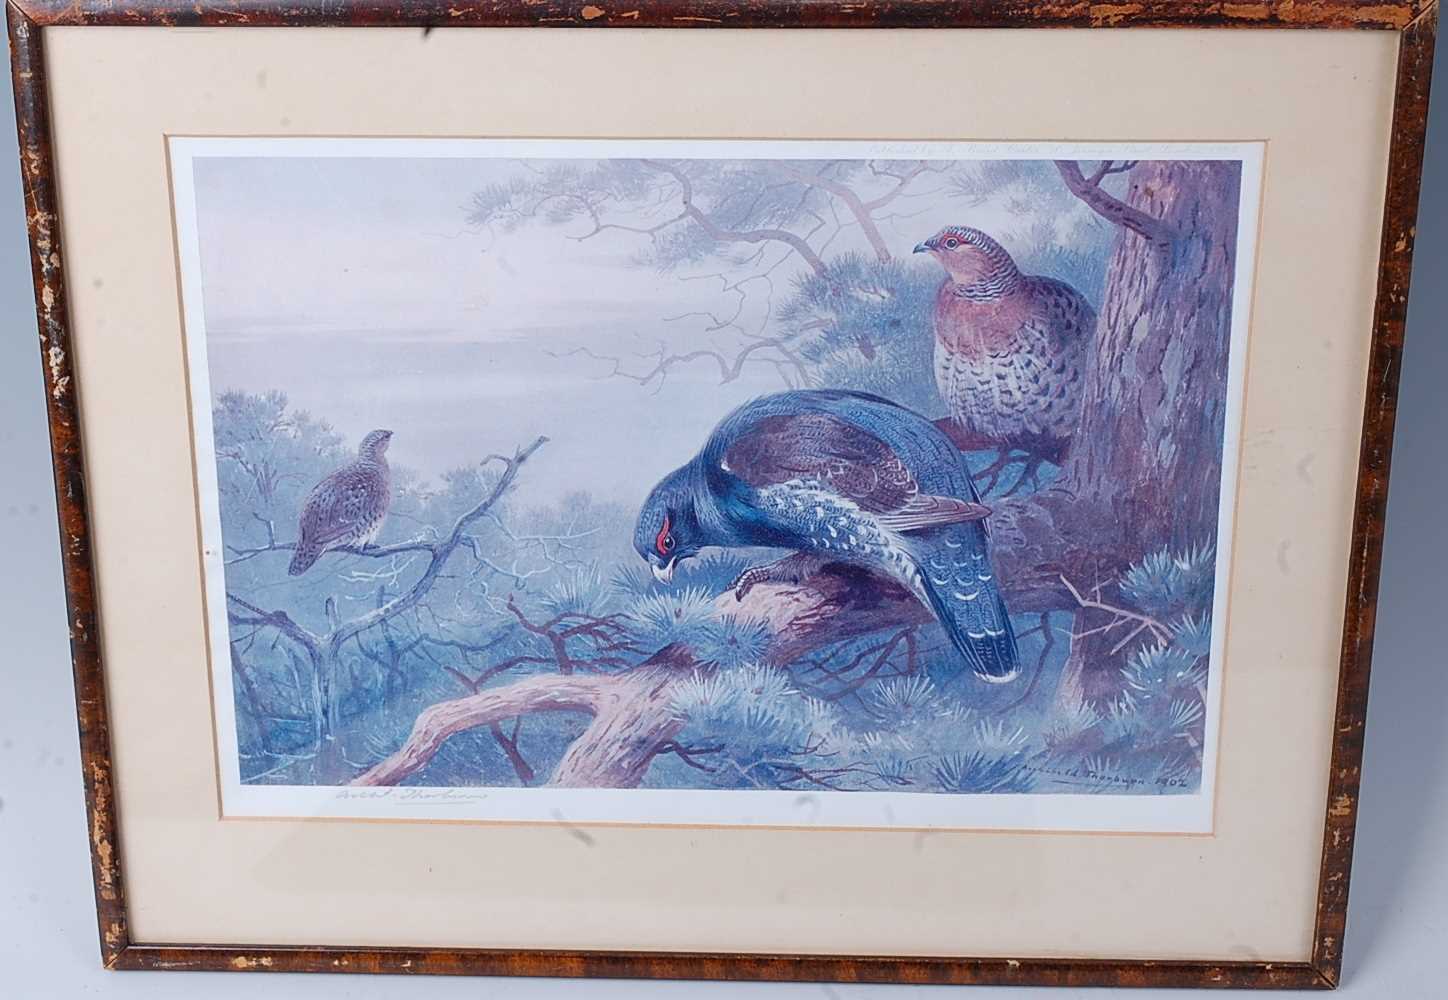 After Archibald Thorburn, (1860-1935), Pheasants and Grouse amongst reeds, lithograph print, - Image 4 of 5